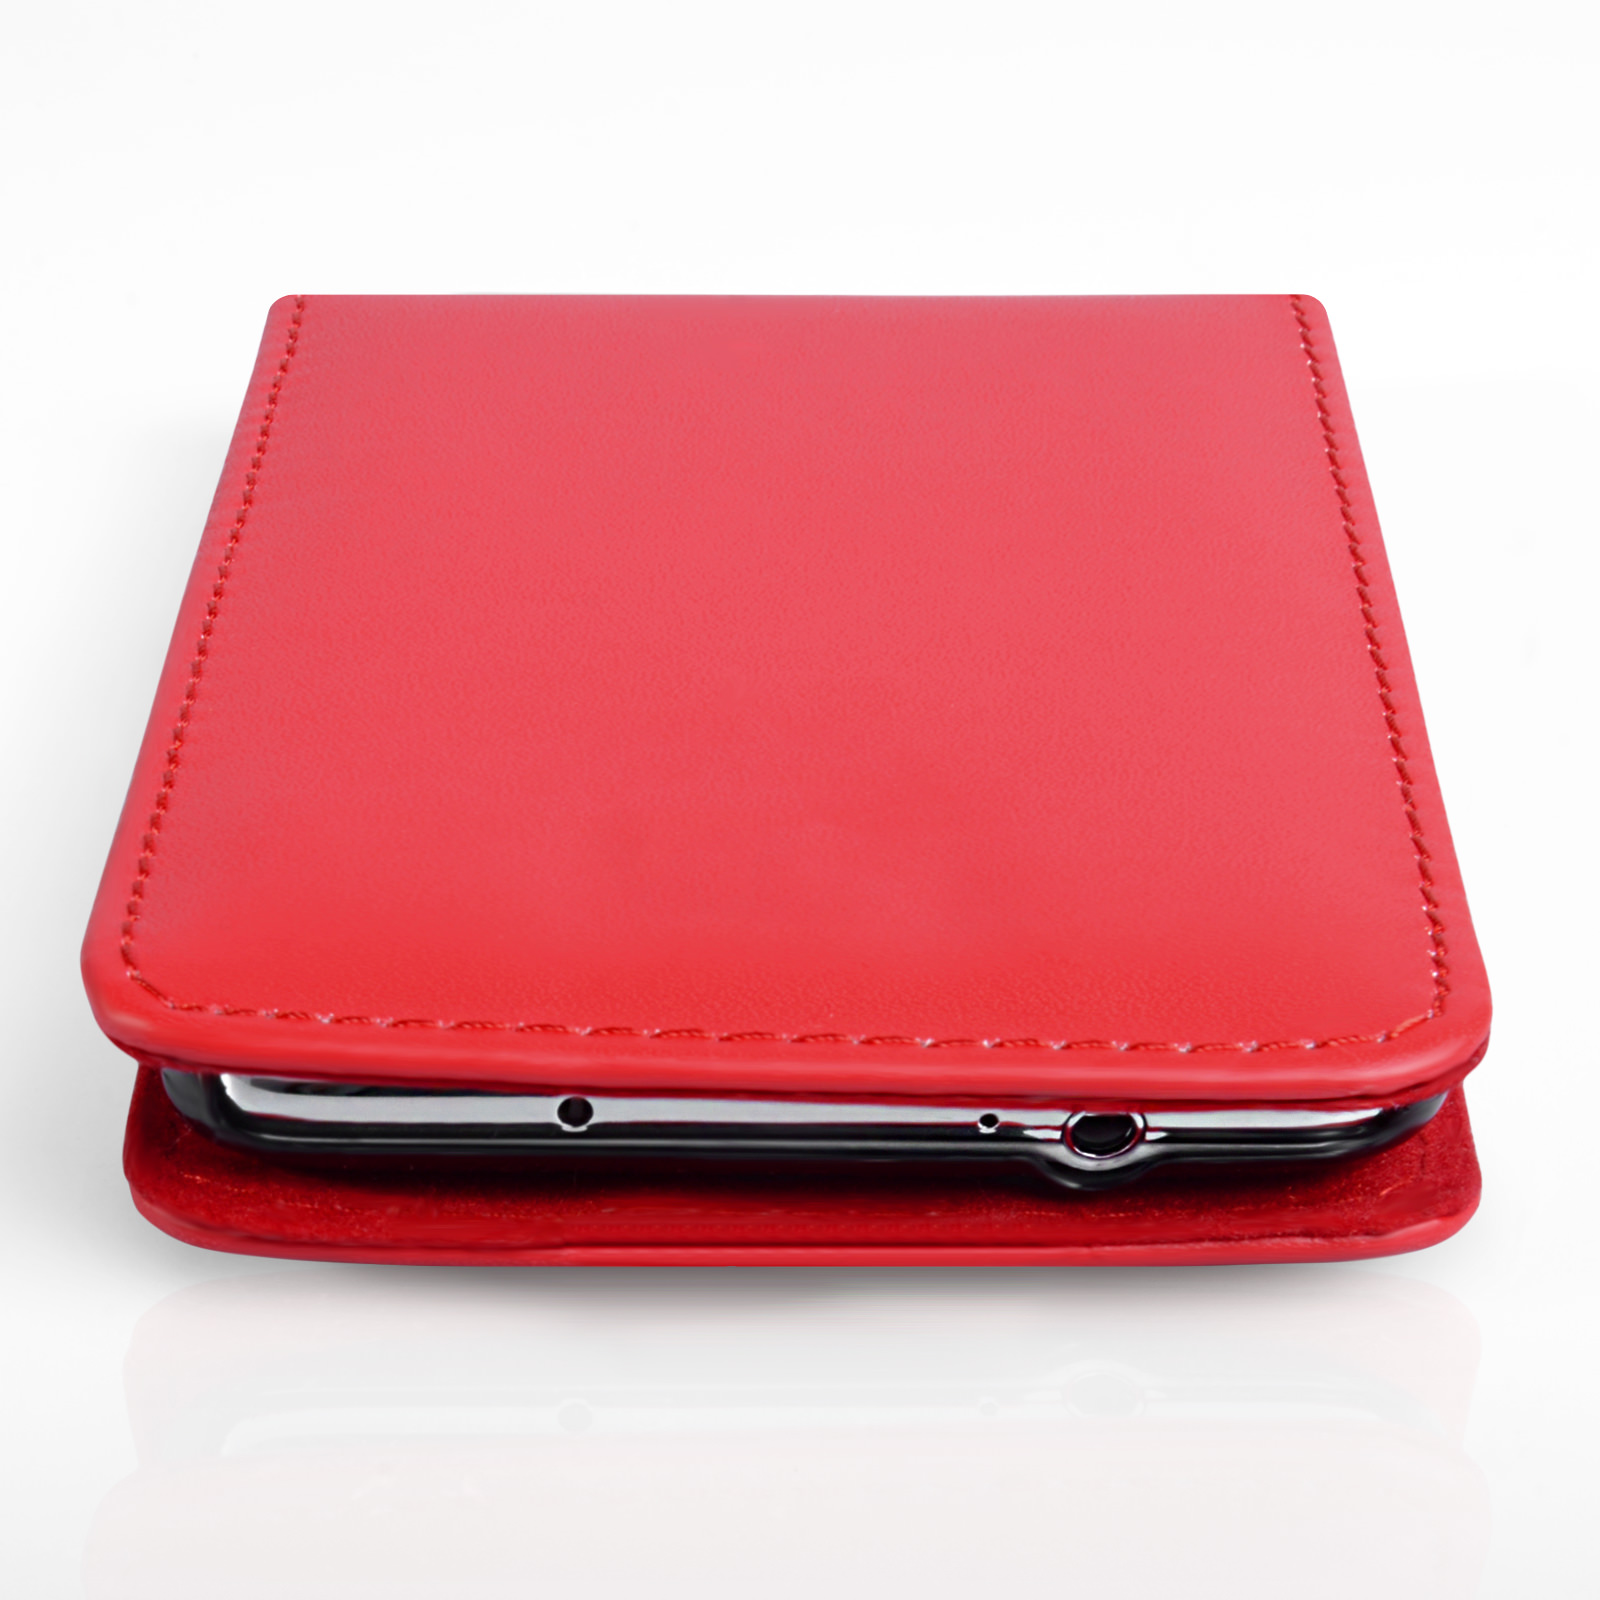 YouSave Samsung Galaxy Note 3 Neo Leather-Effect Flip Case - Red